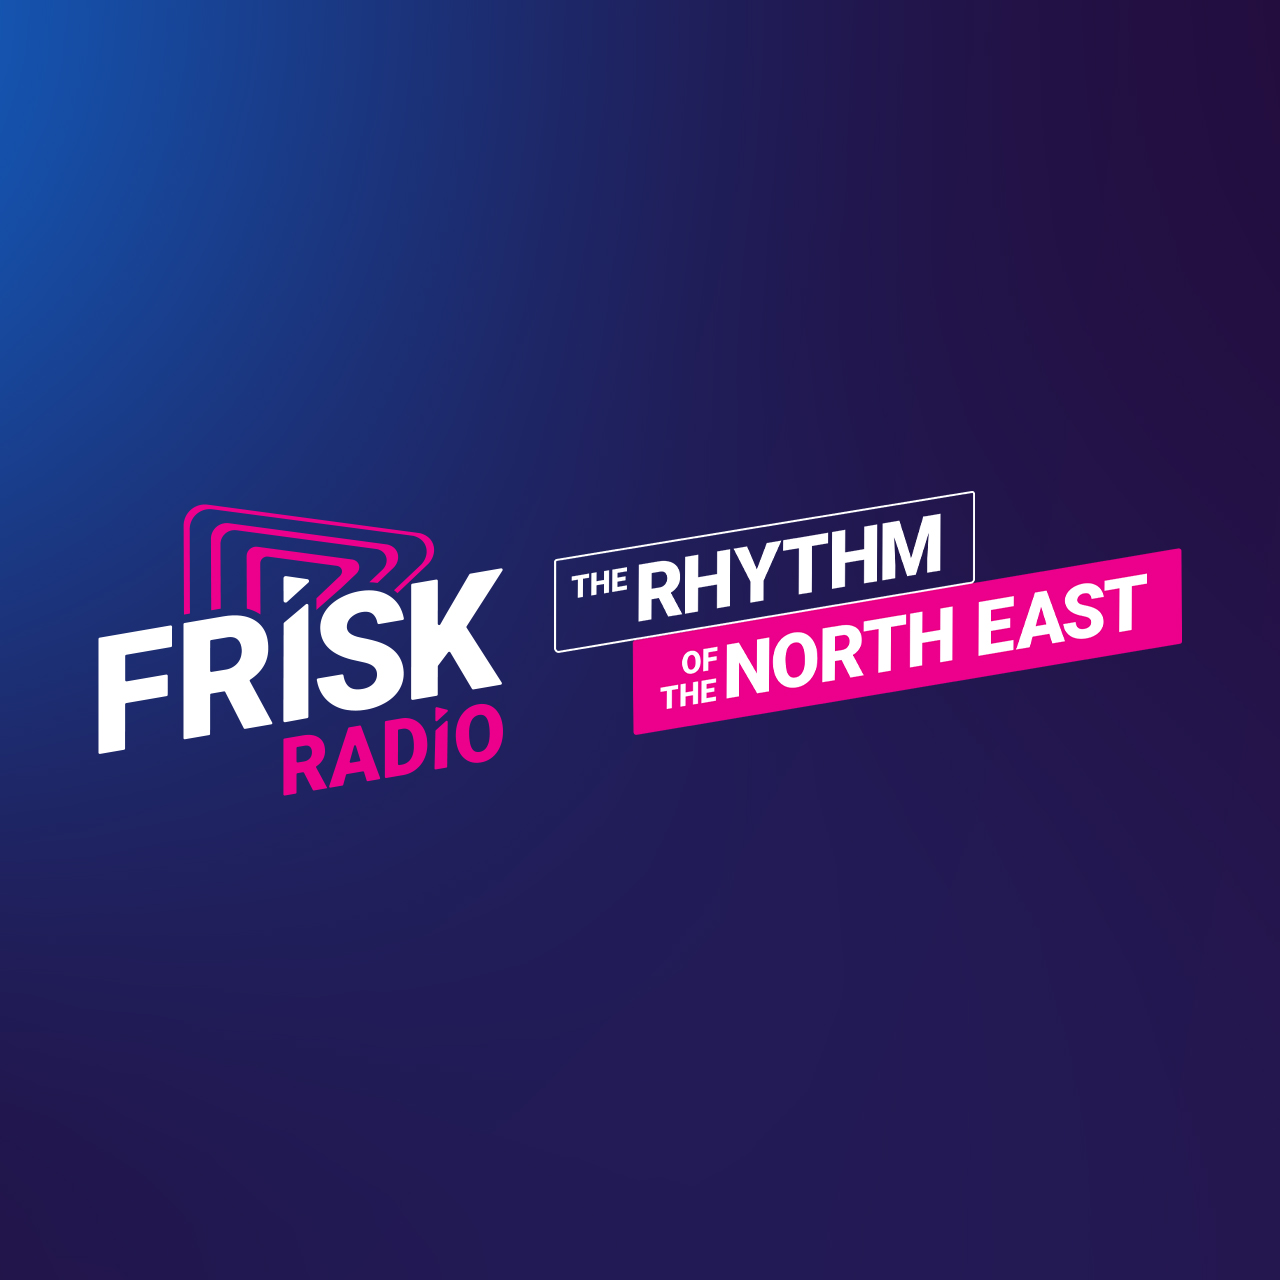 What is Frisk Radio?